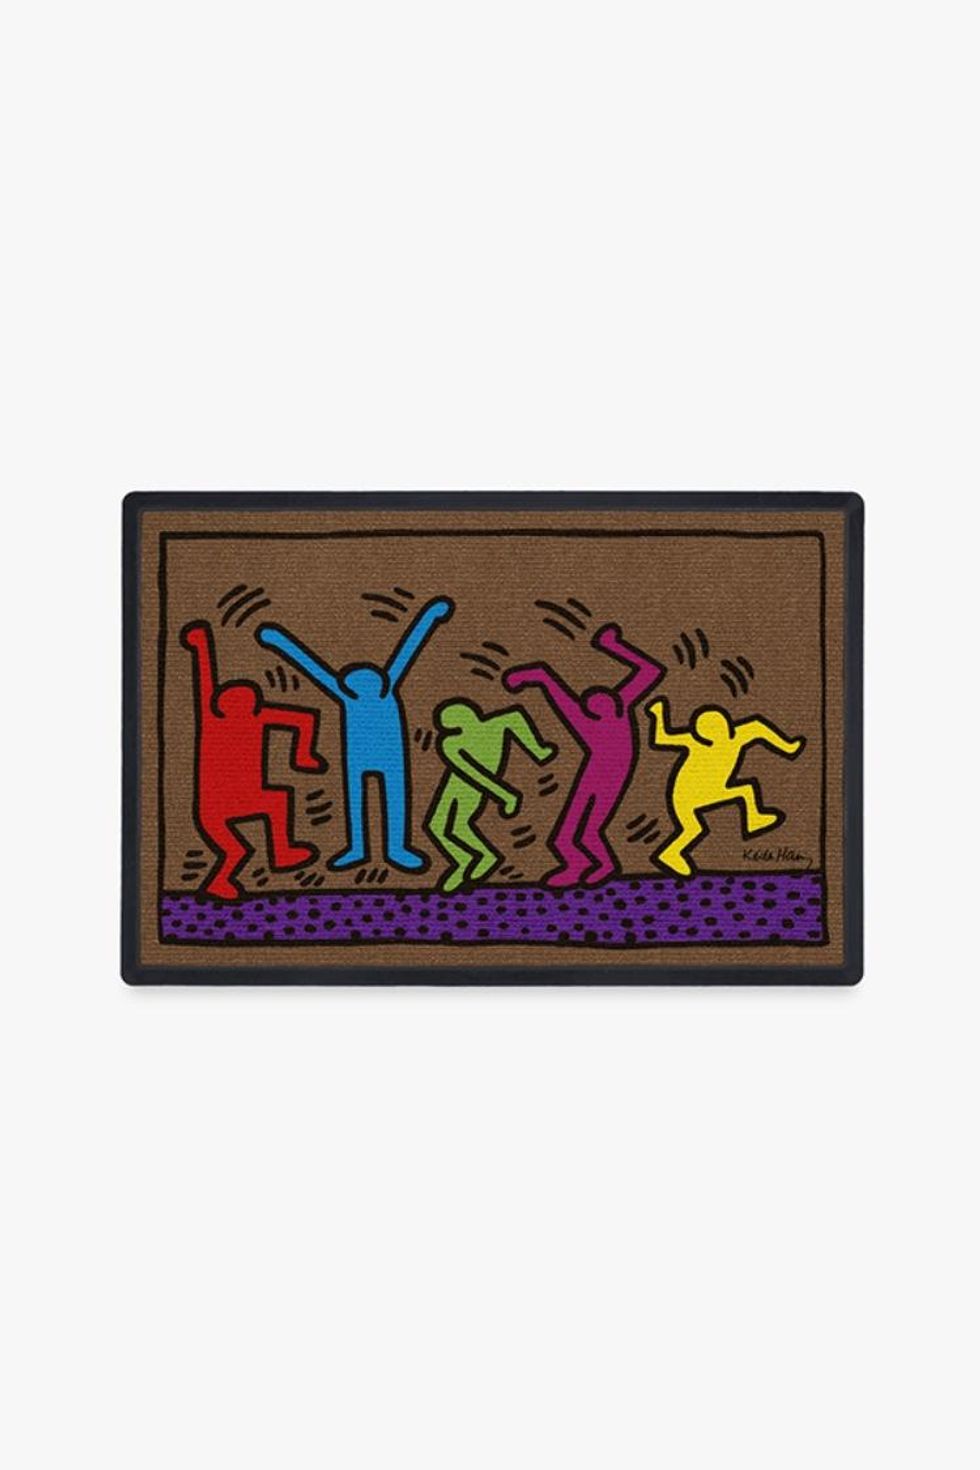 keith-haring-dance-party-a-rc-kh006-dm23.jpg